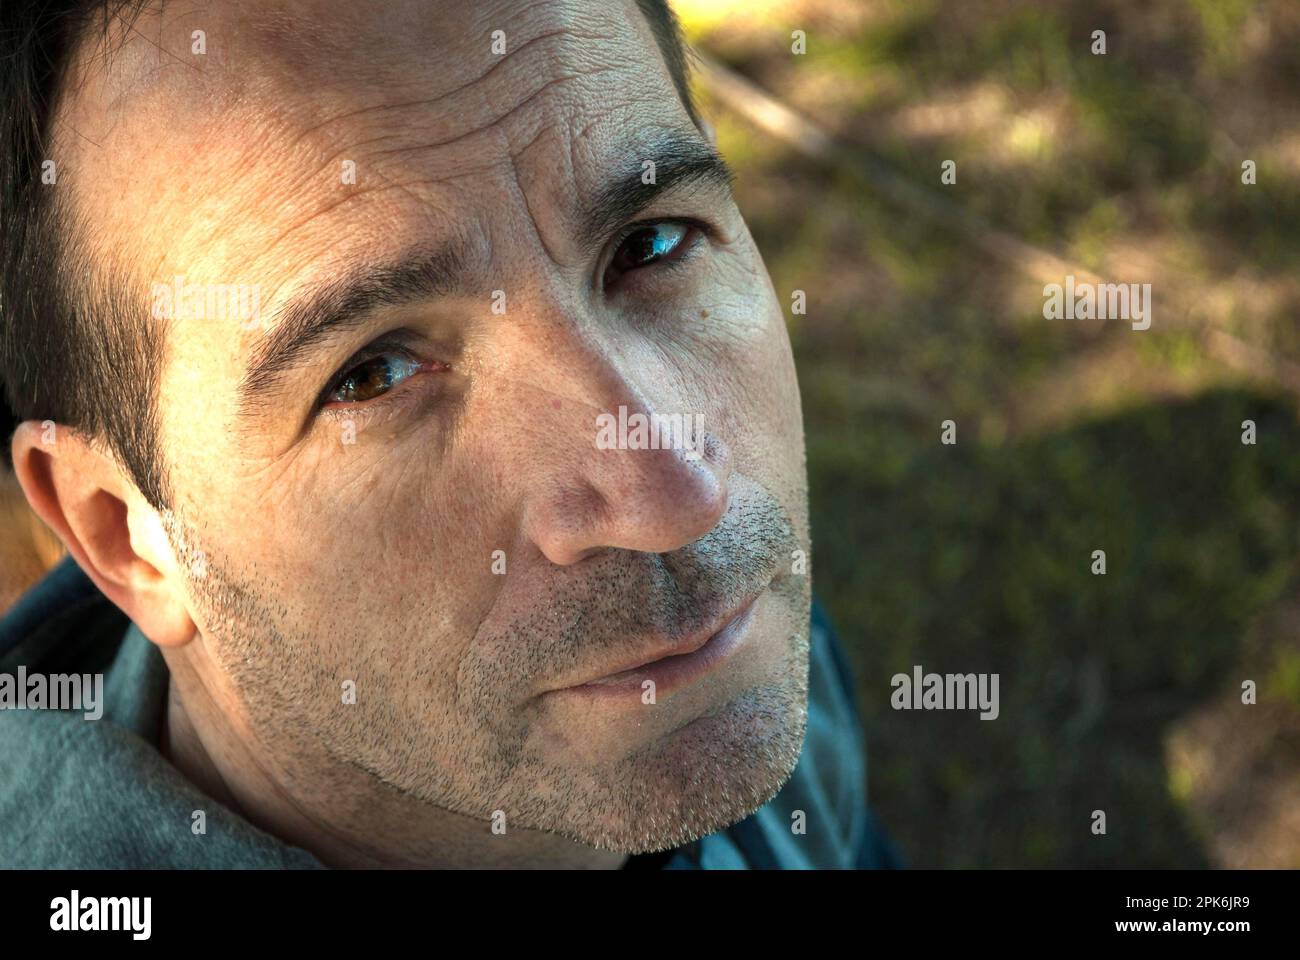 High angle view portrait of an adult man looking at the camera Stock Photo